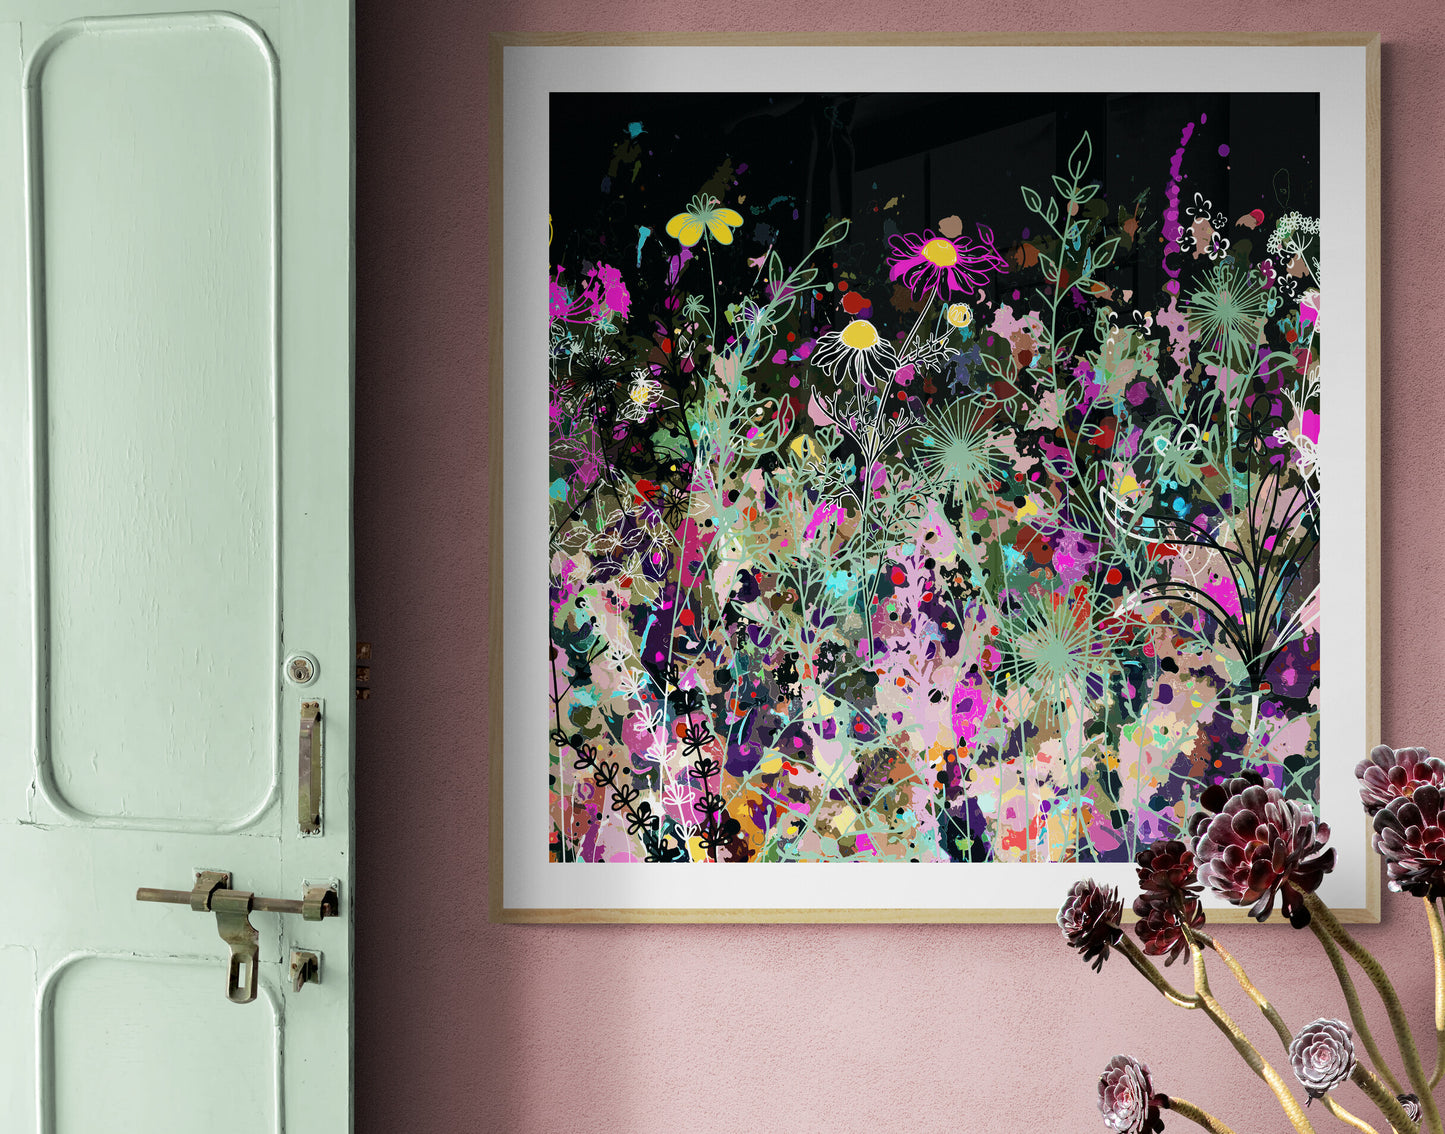 Dark Floral Meadow Wall Art Print on Stretched Canvas or Fine Art Paper - FM104